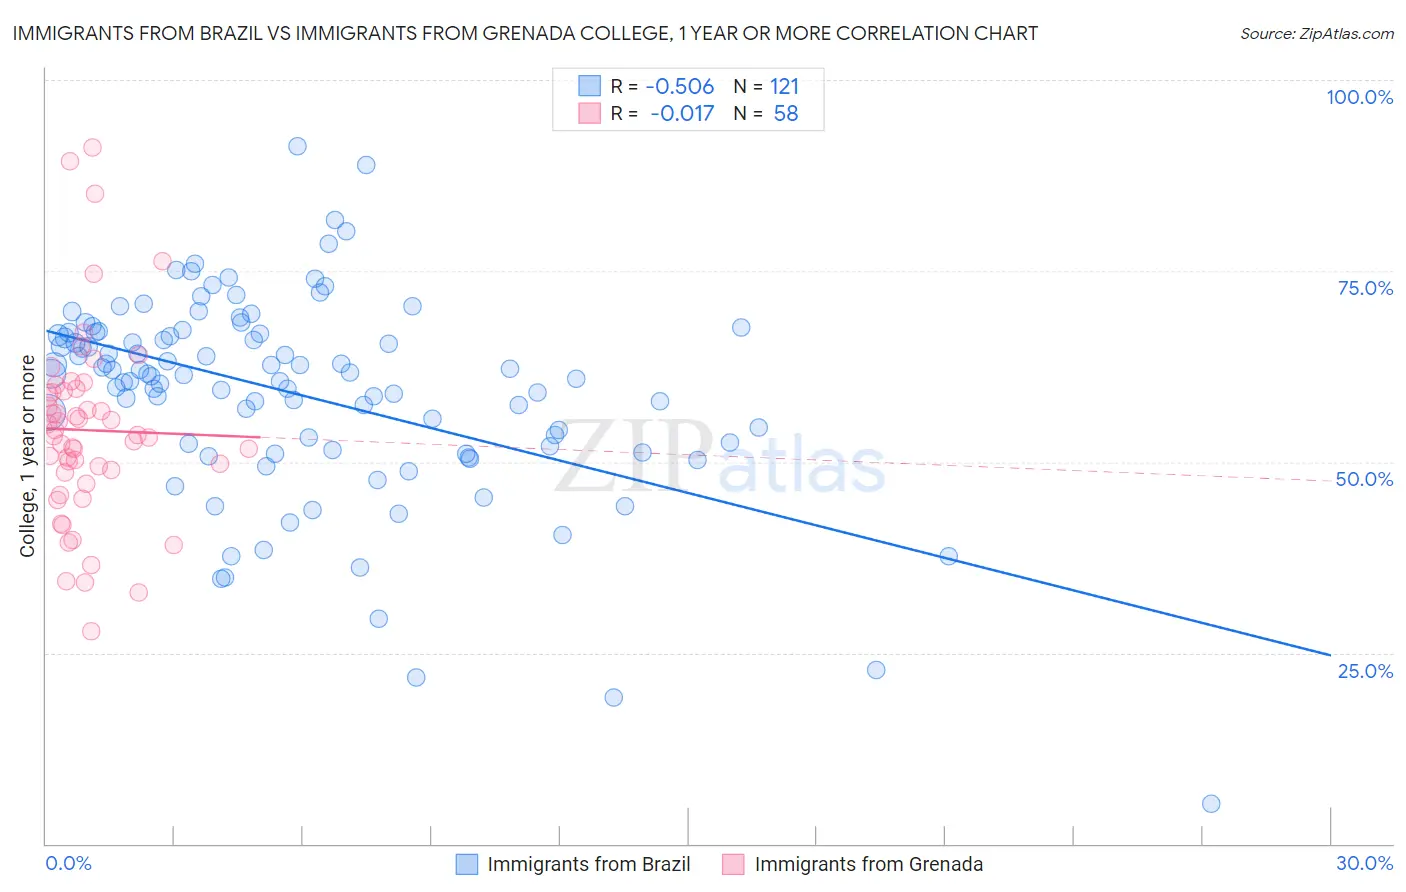 Immigrants from Brazil vs Immigrants from Grenada College, 1 year or more